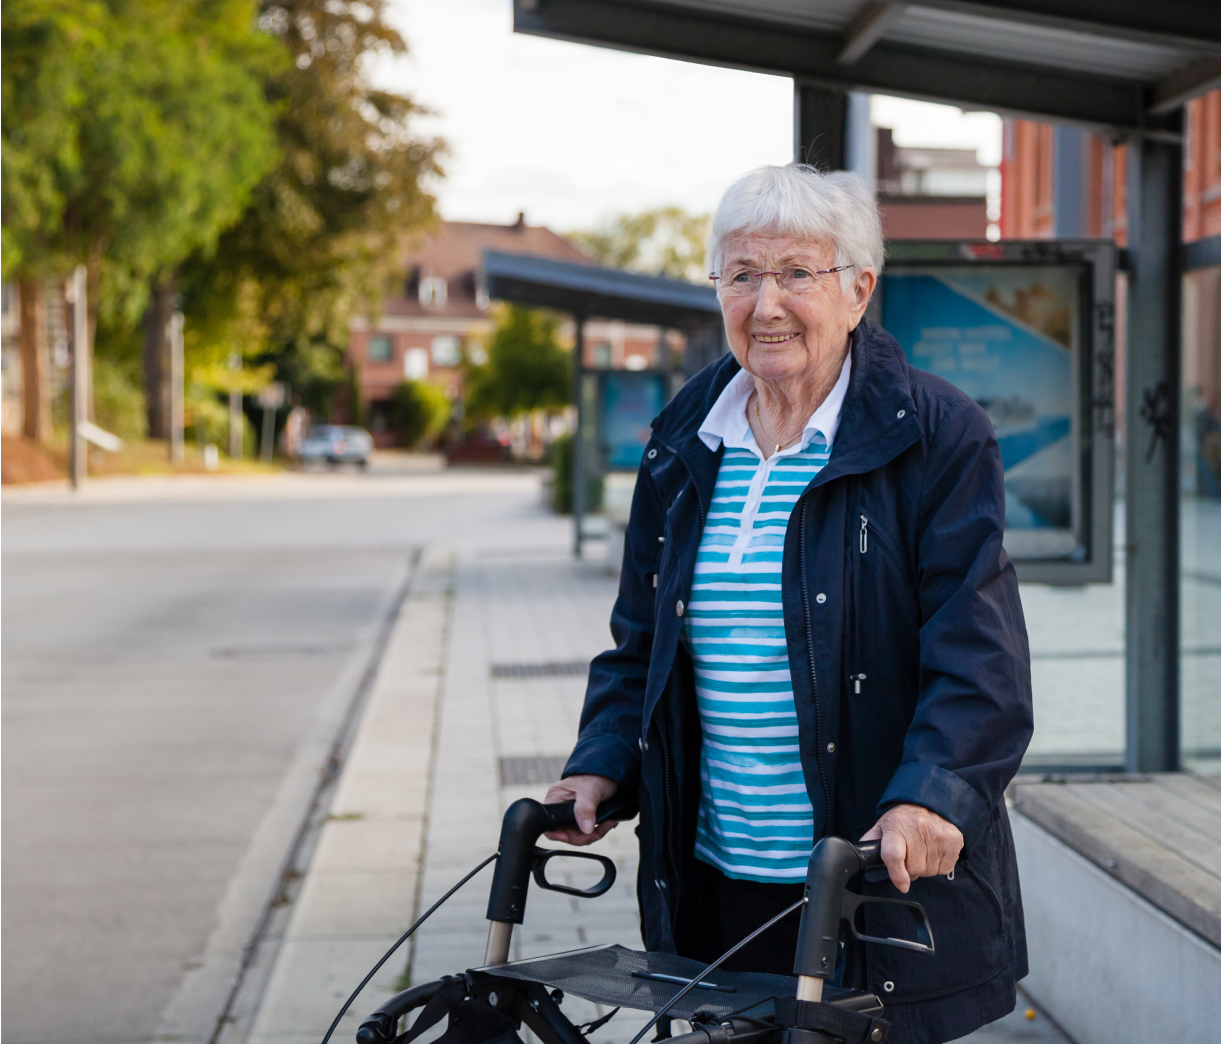 elderly woman at bus stop